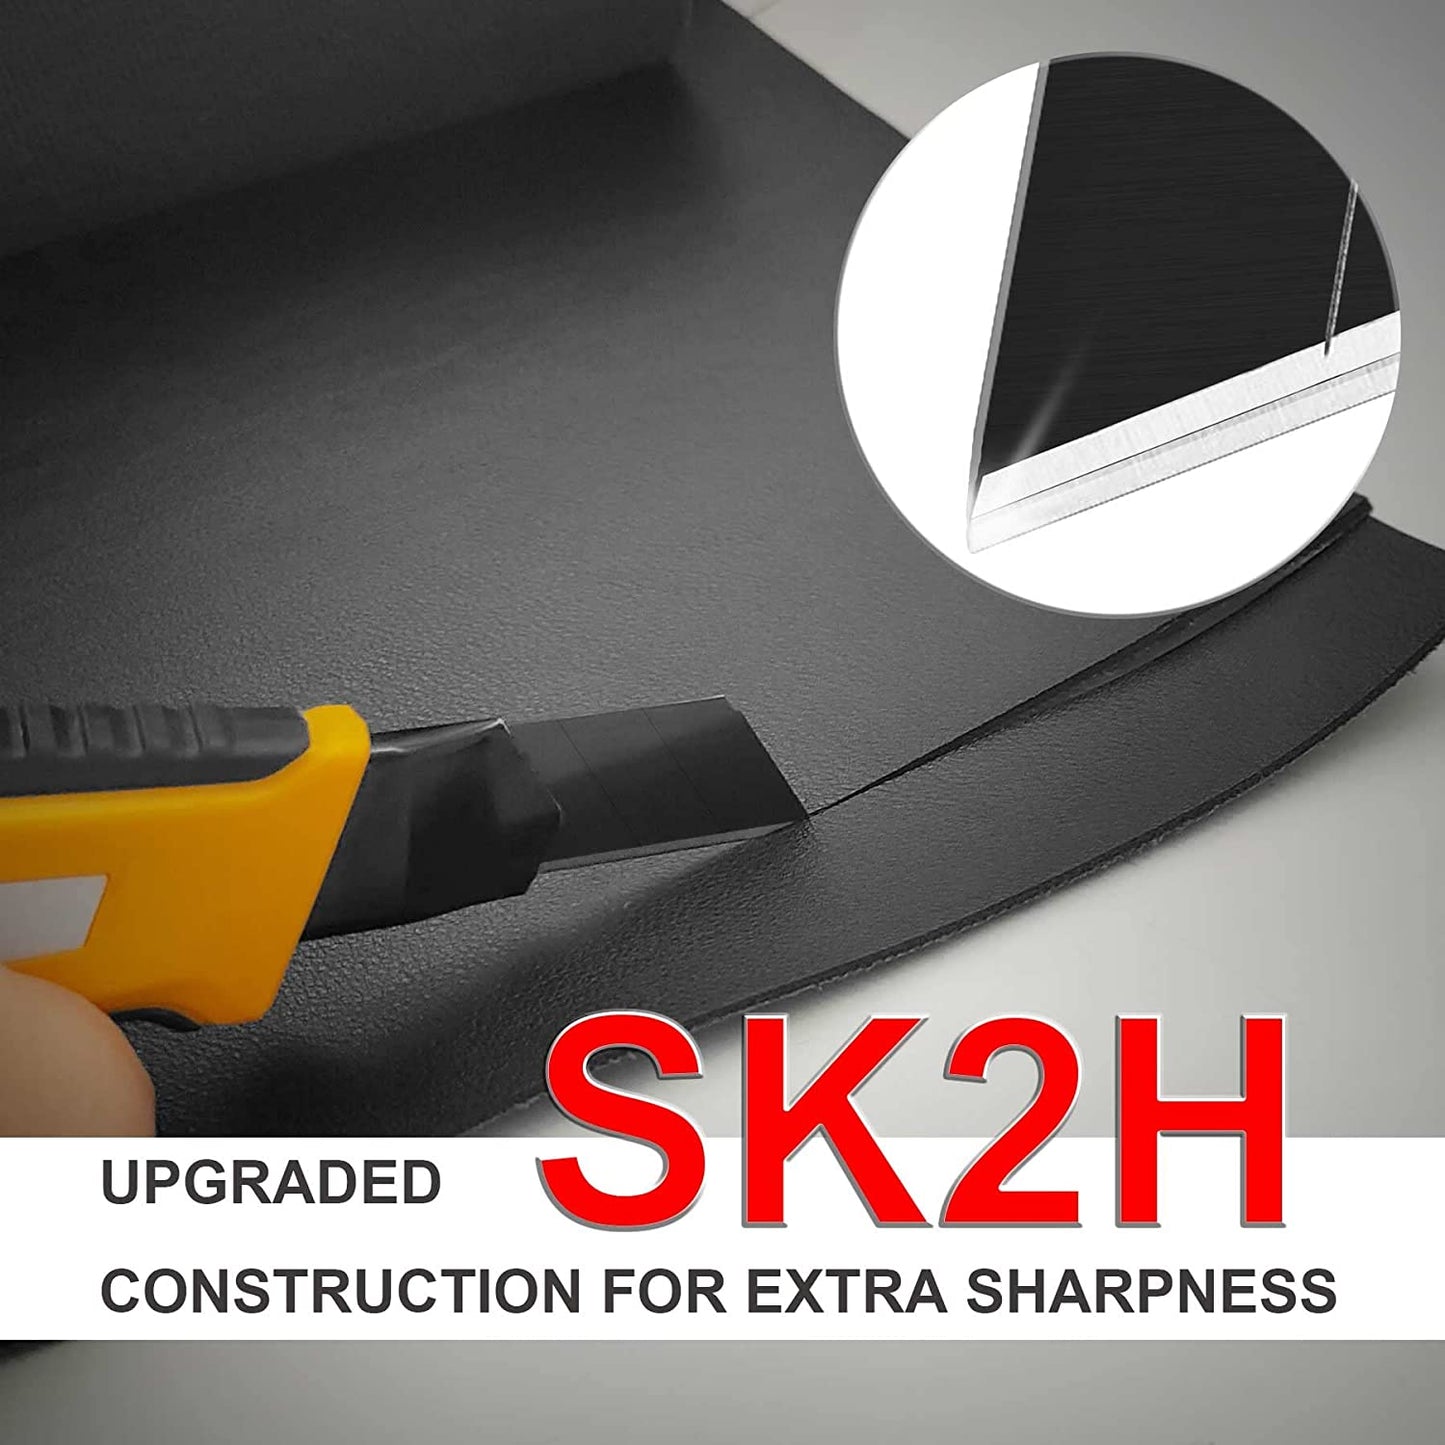 HAUTMEC 20PCS 18mm SK2H Ultra Sharp Snap Off Blades, Retractable Black Utility Knife Replacement Blades, Sharper SK2H Heavy Duty Blades, Creative Safety Box, for Box, Carpet, Rope HT0144-20PC